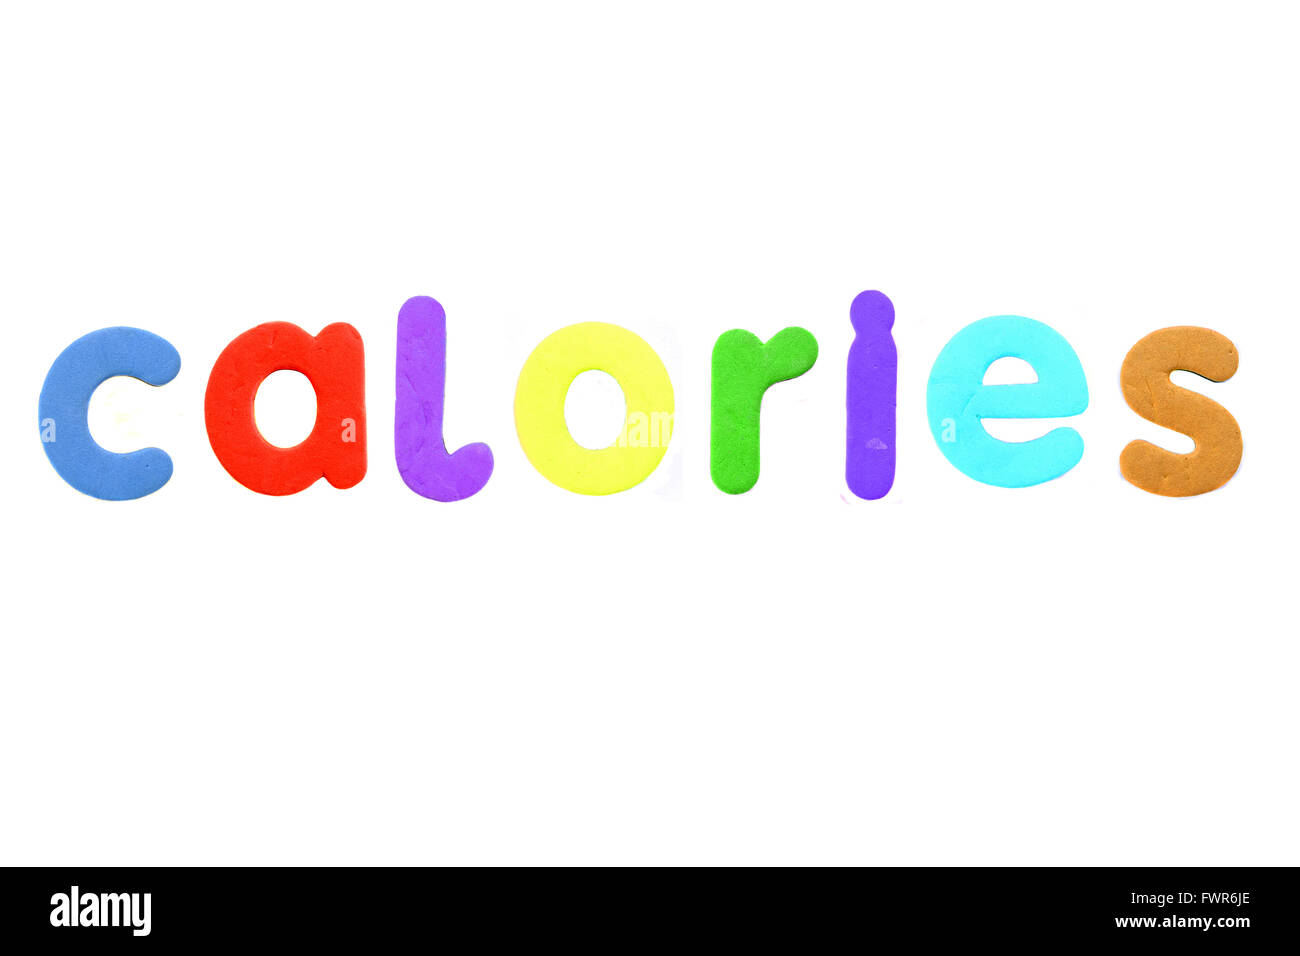 The word calories created from alphabetic fridge magnets against a white background. Stock Photo